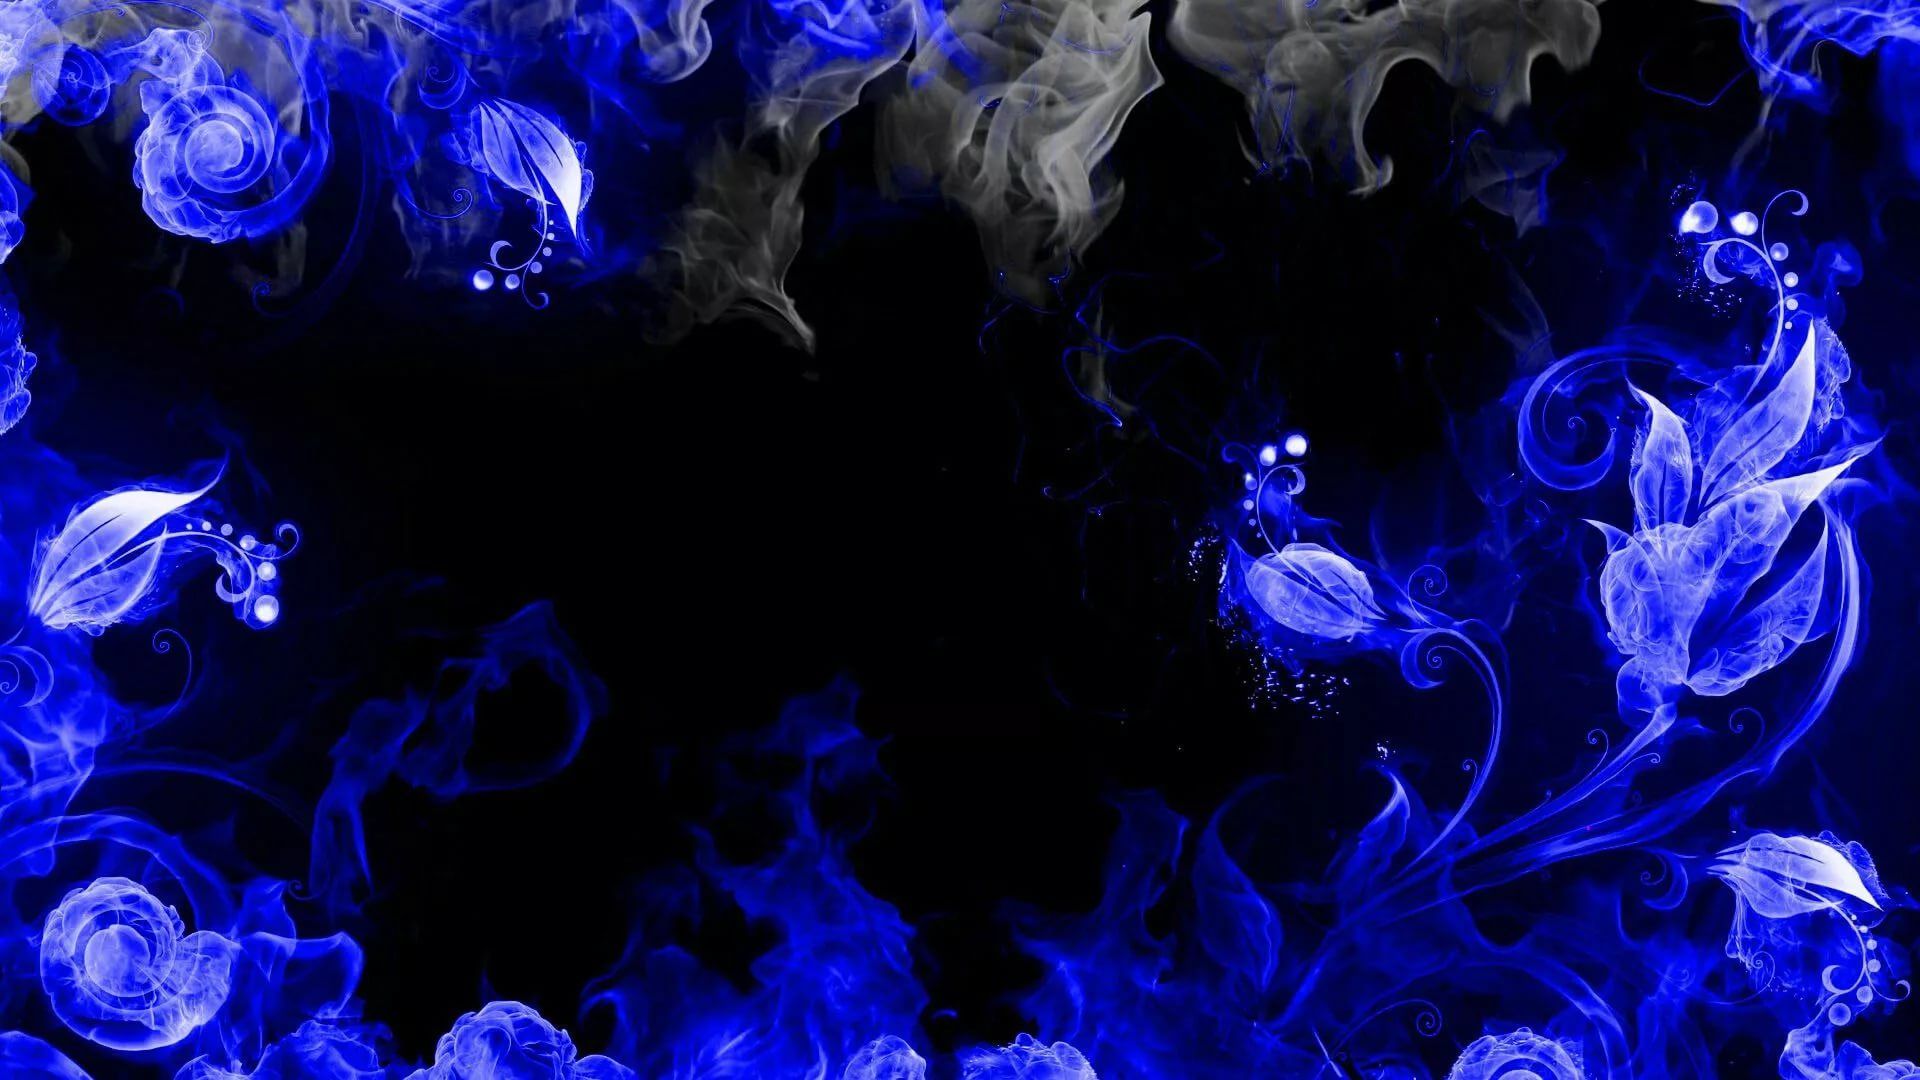 Black And Blue download free wallpaper image search